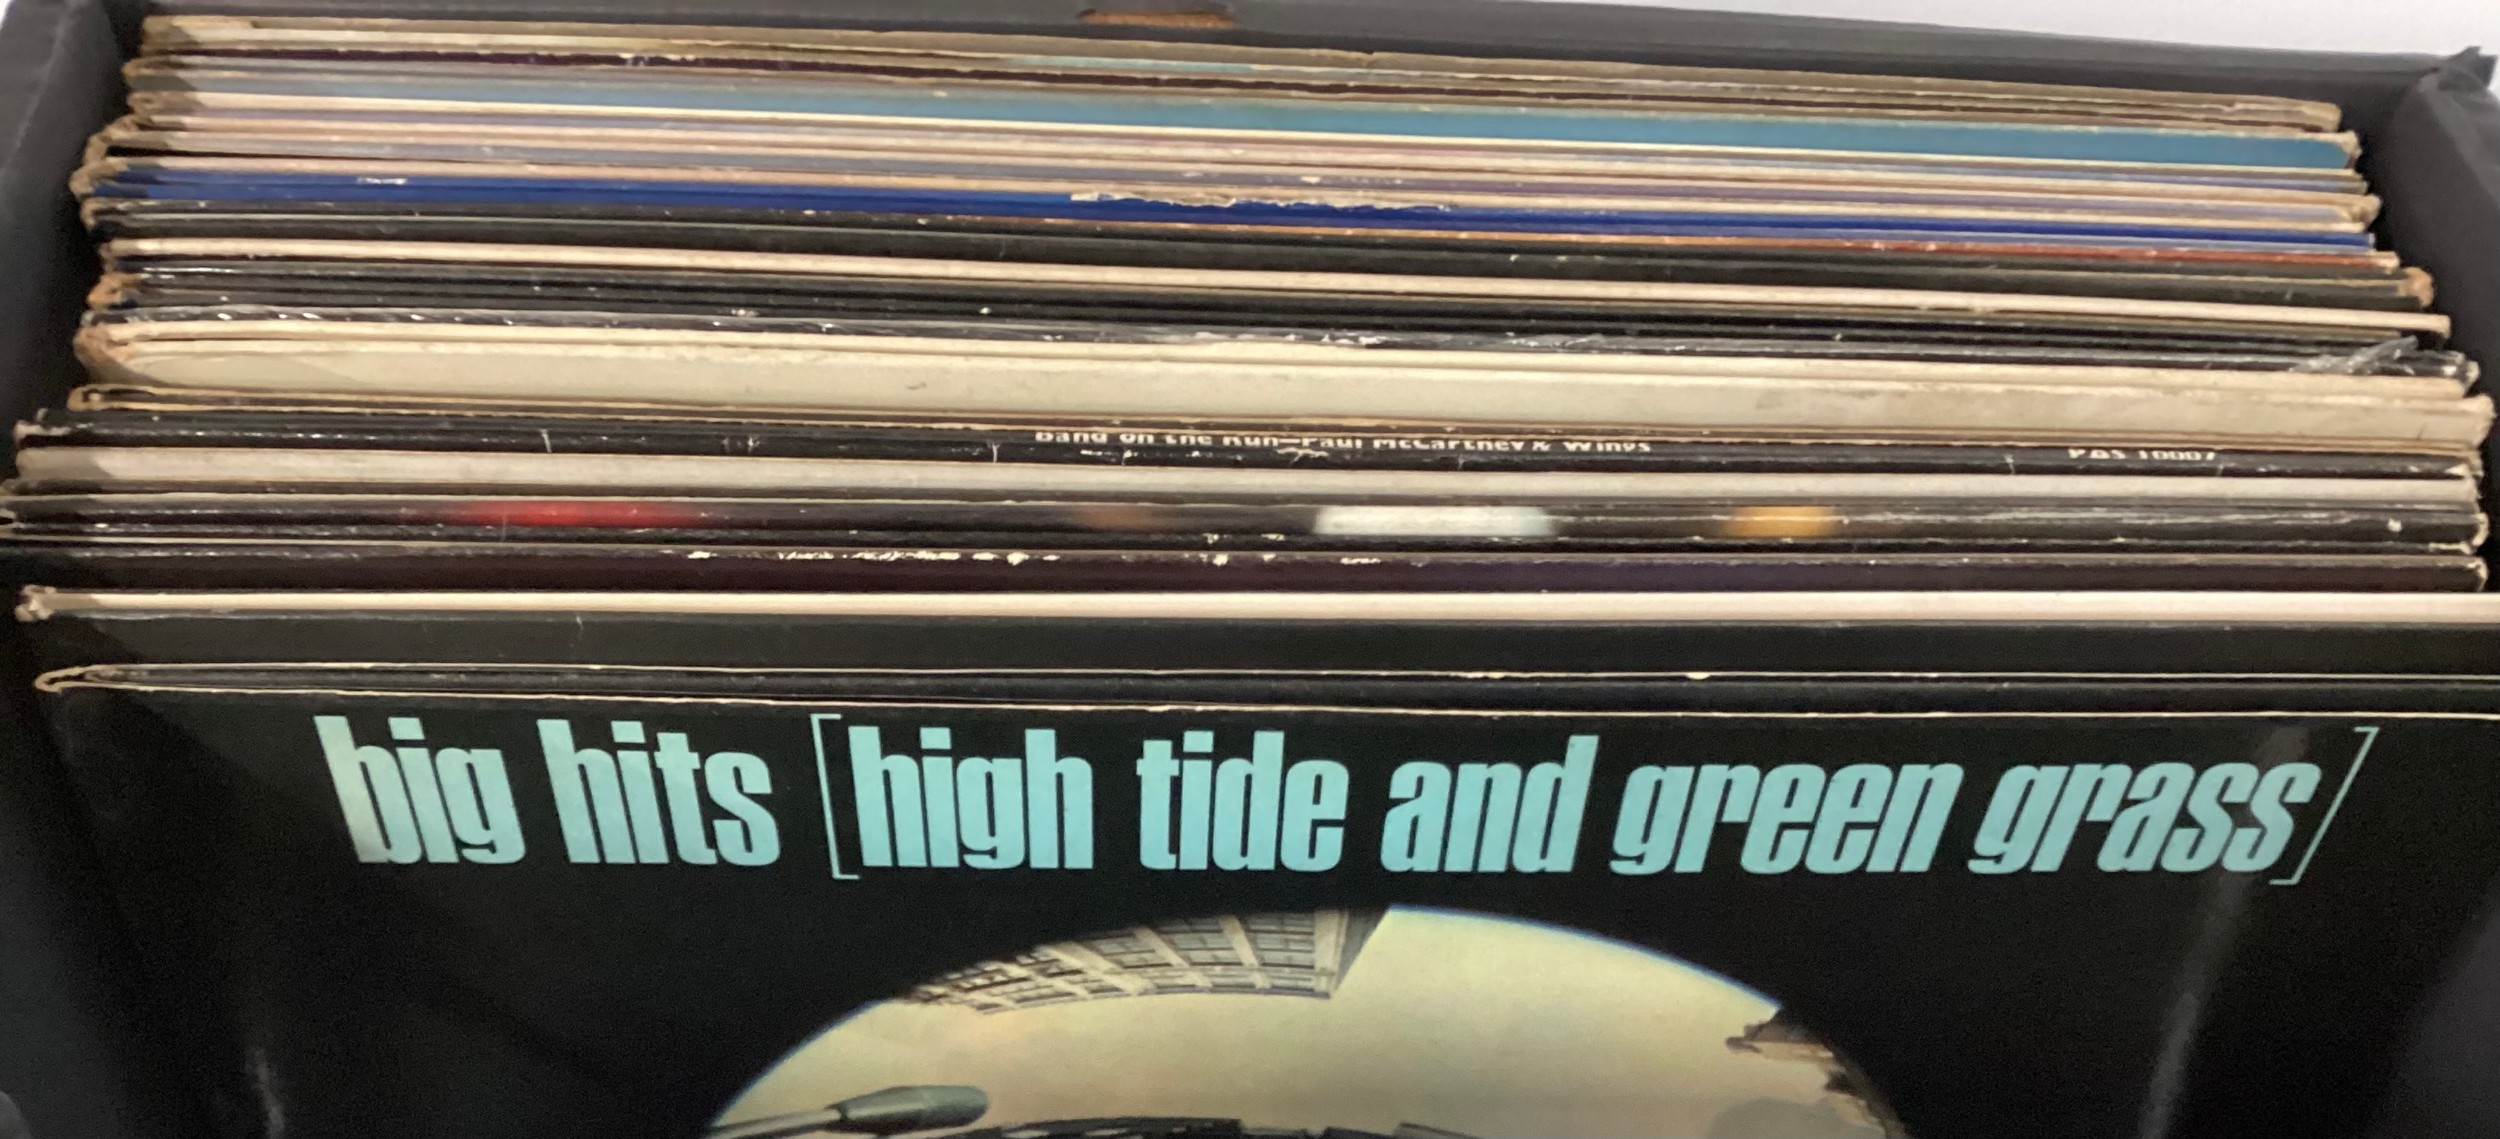 CASE OF VARIOUS ROCK AND POP VINYL LP RECORDS. Artists here include - The Rolling Stones - ABBA -